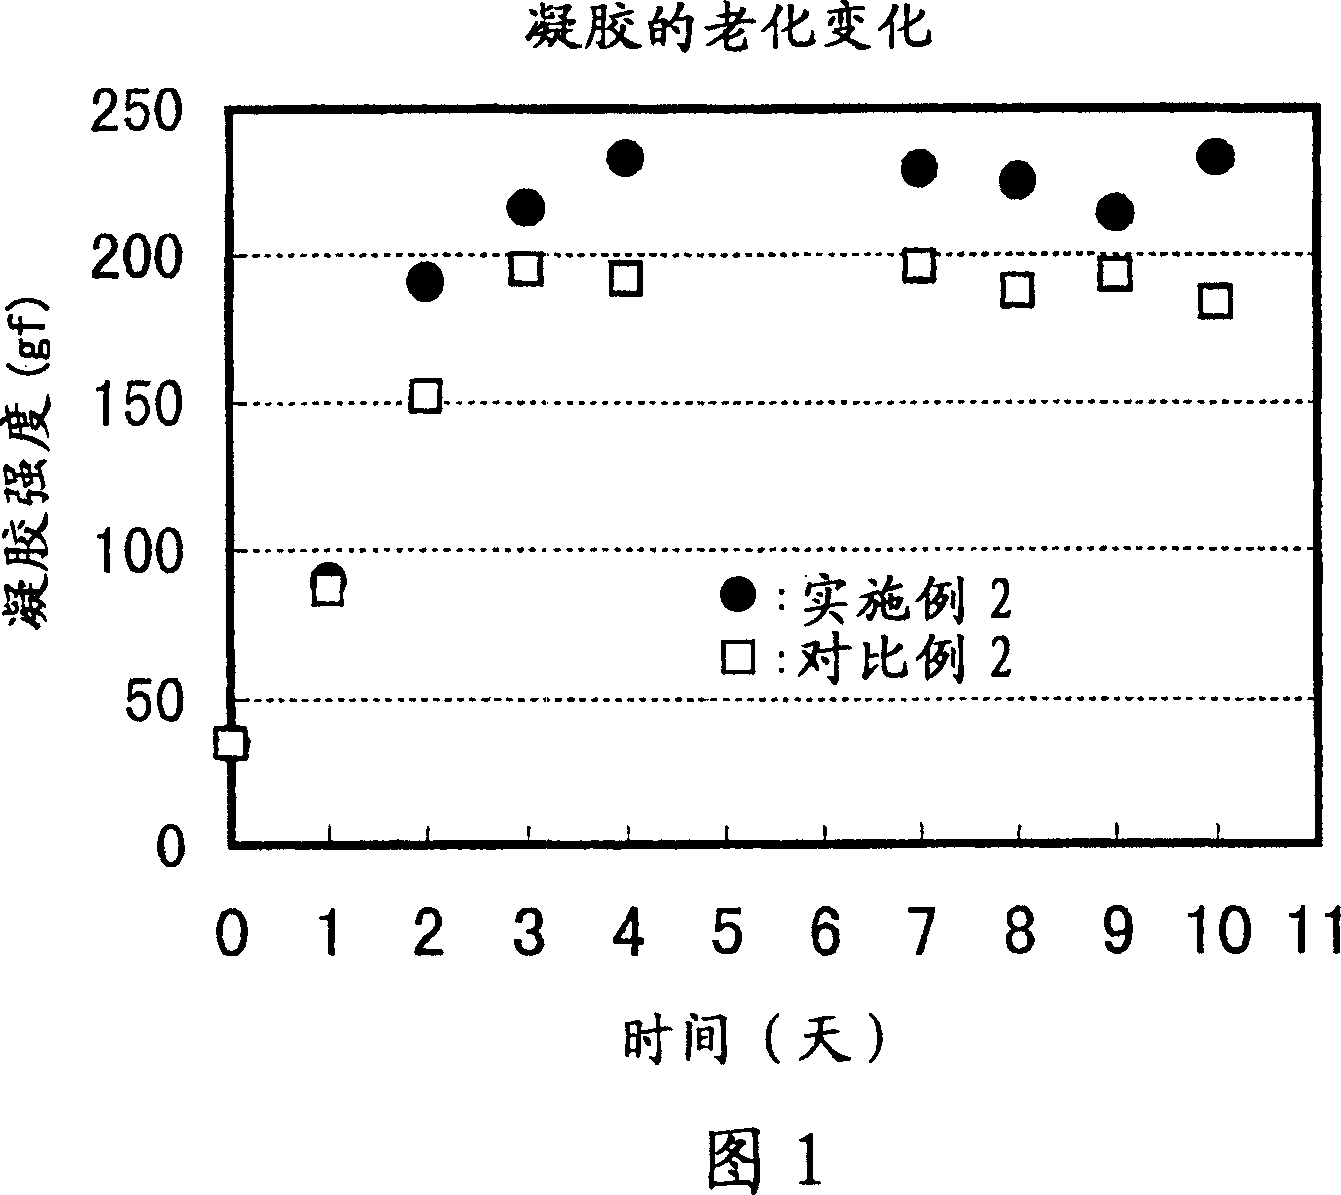 Adhesive for dermal patch and production process thereof